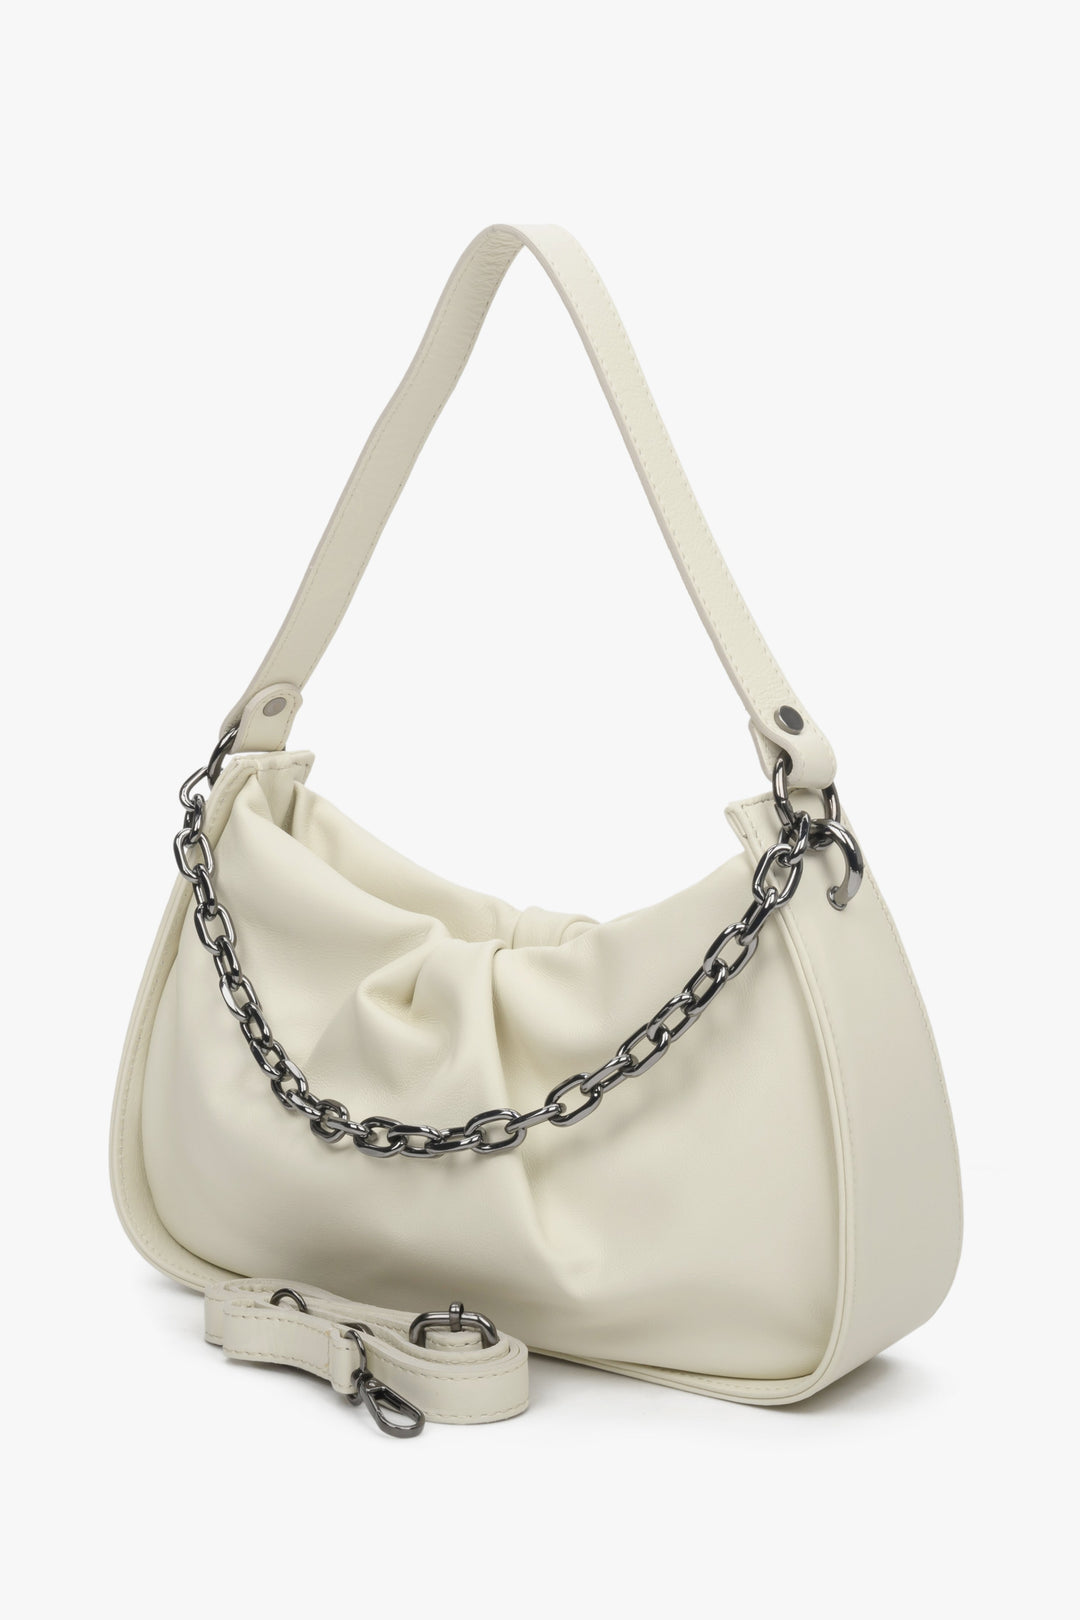 Women's white shoulder bag made of genuine leather with a chain strap.